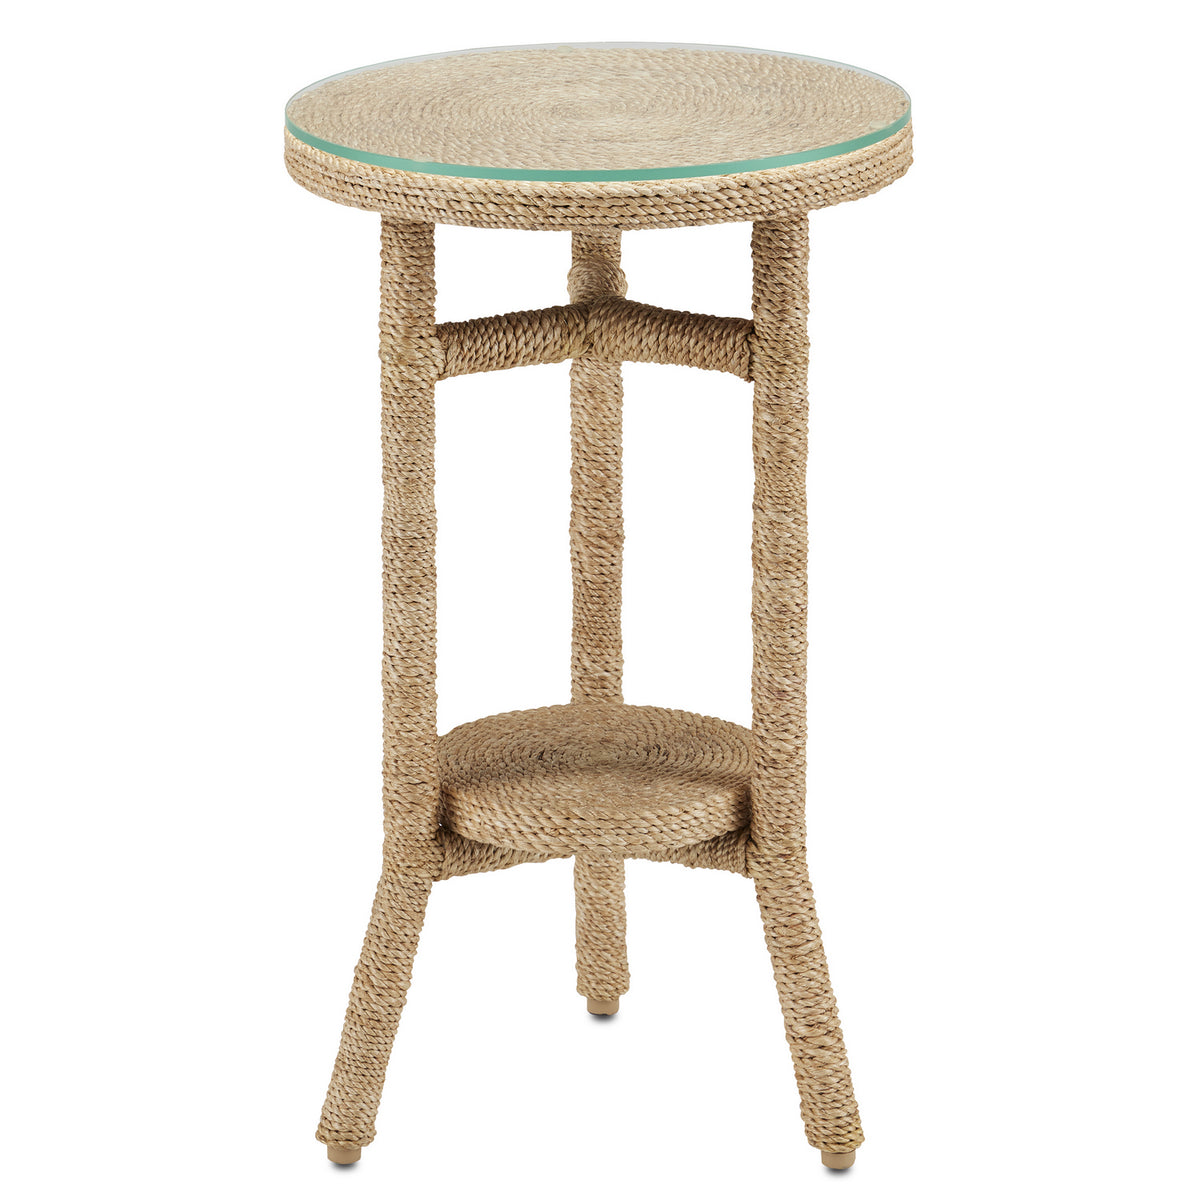 Currey and Company - 3000-0214 - Drinks Table - Limay - Natural Rope